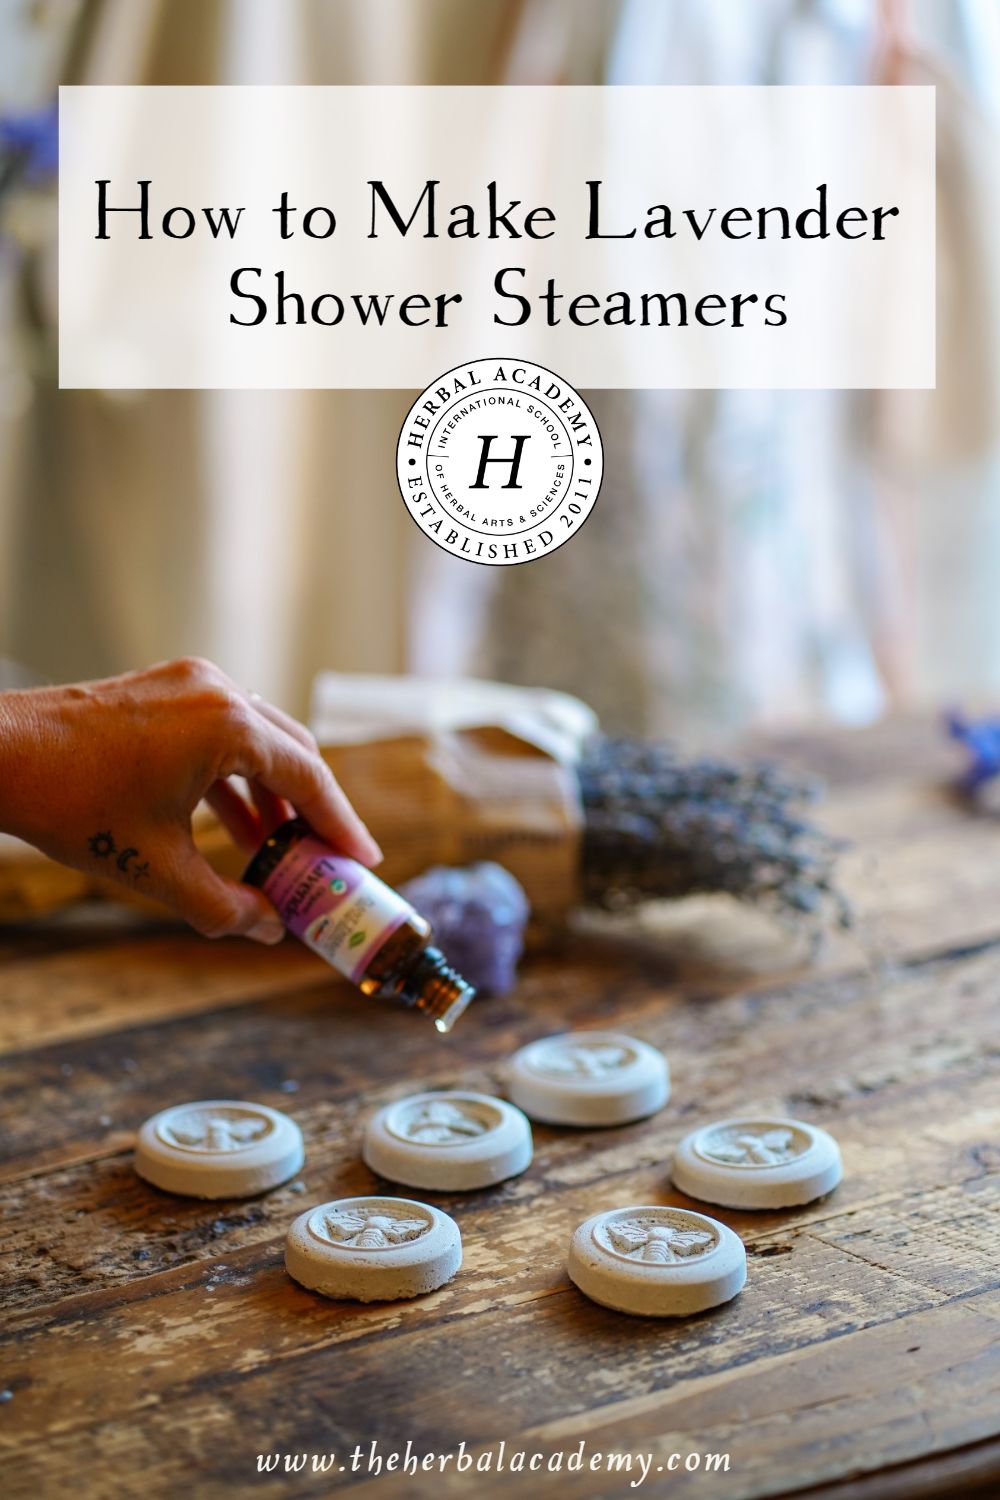 How to Make Lavender Shower Steamers | Herbal Academy | Making these shower steamers is so simple that it makes giving yourself and your loved ones the gift of elevated self-care easy.